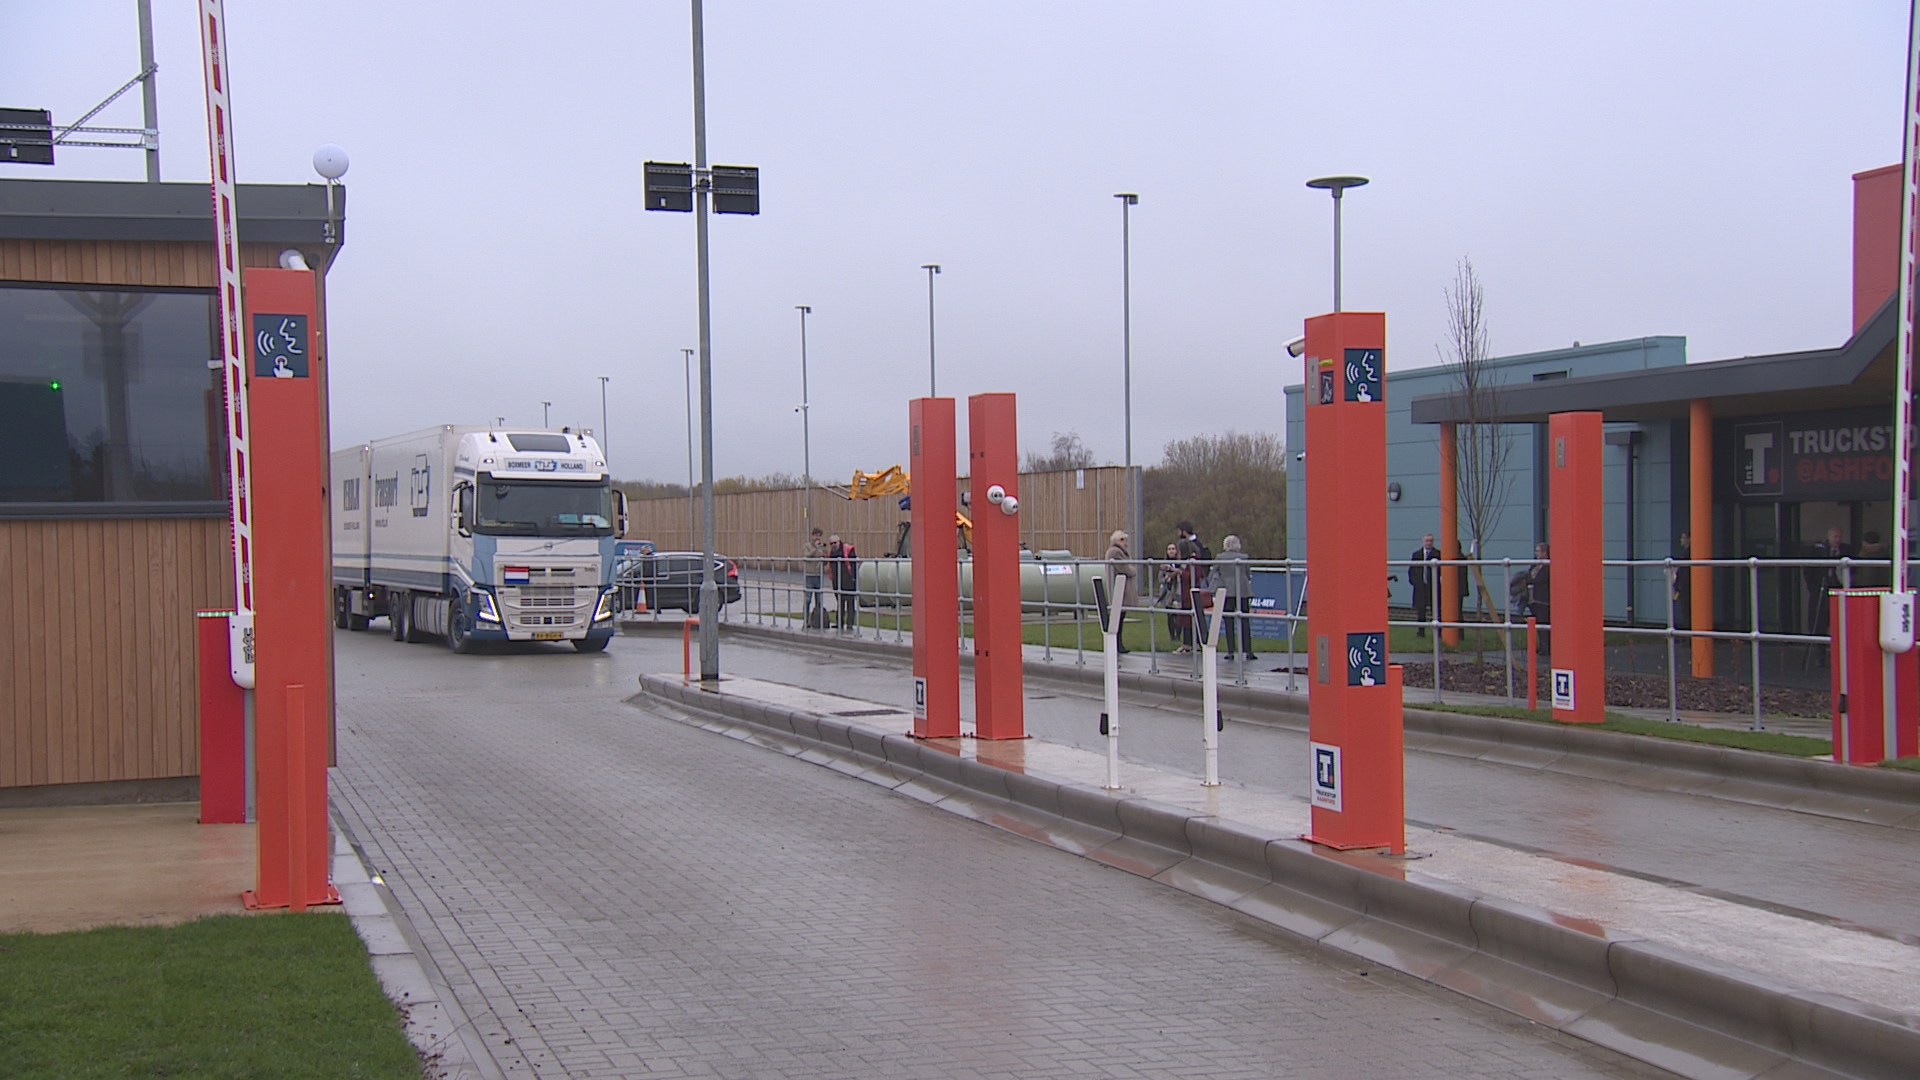 Europe's largest truckstop opens in Kent but will it solve the